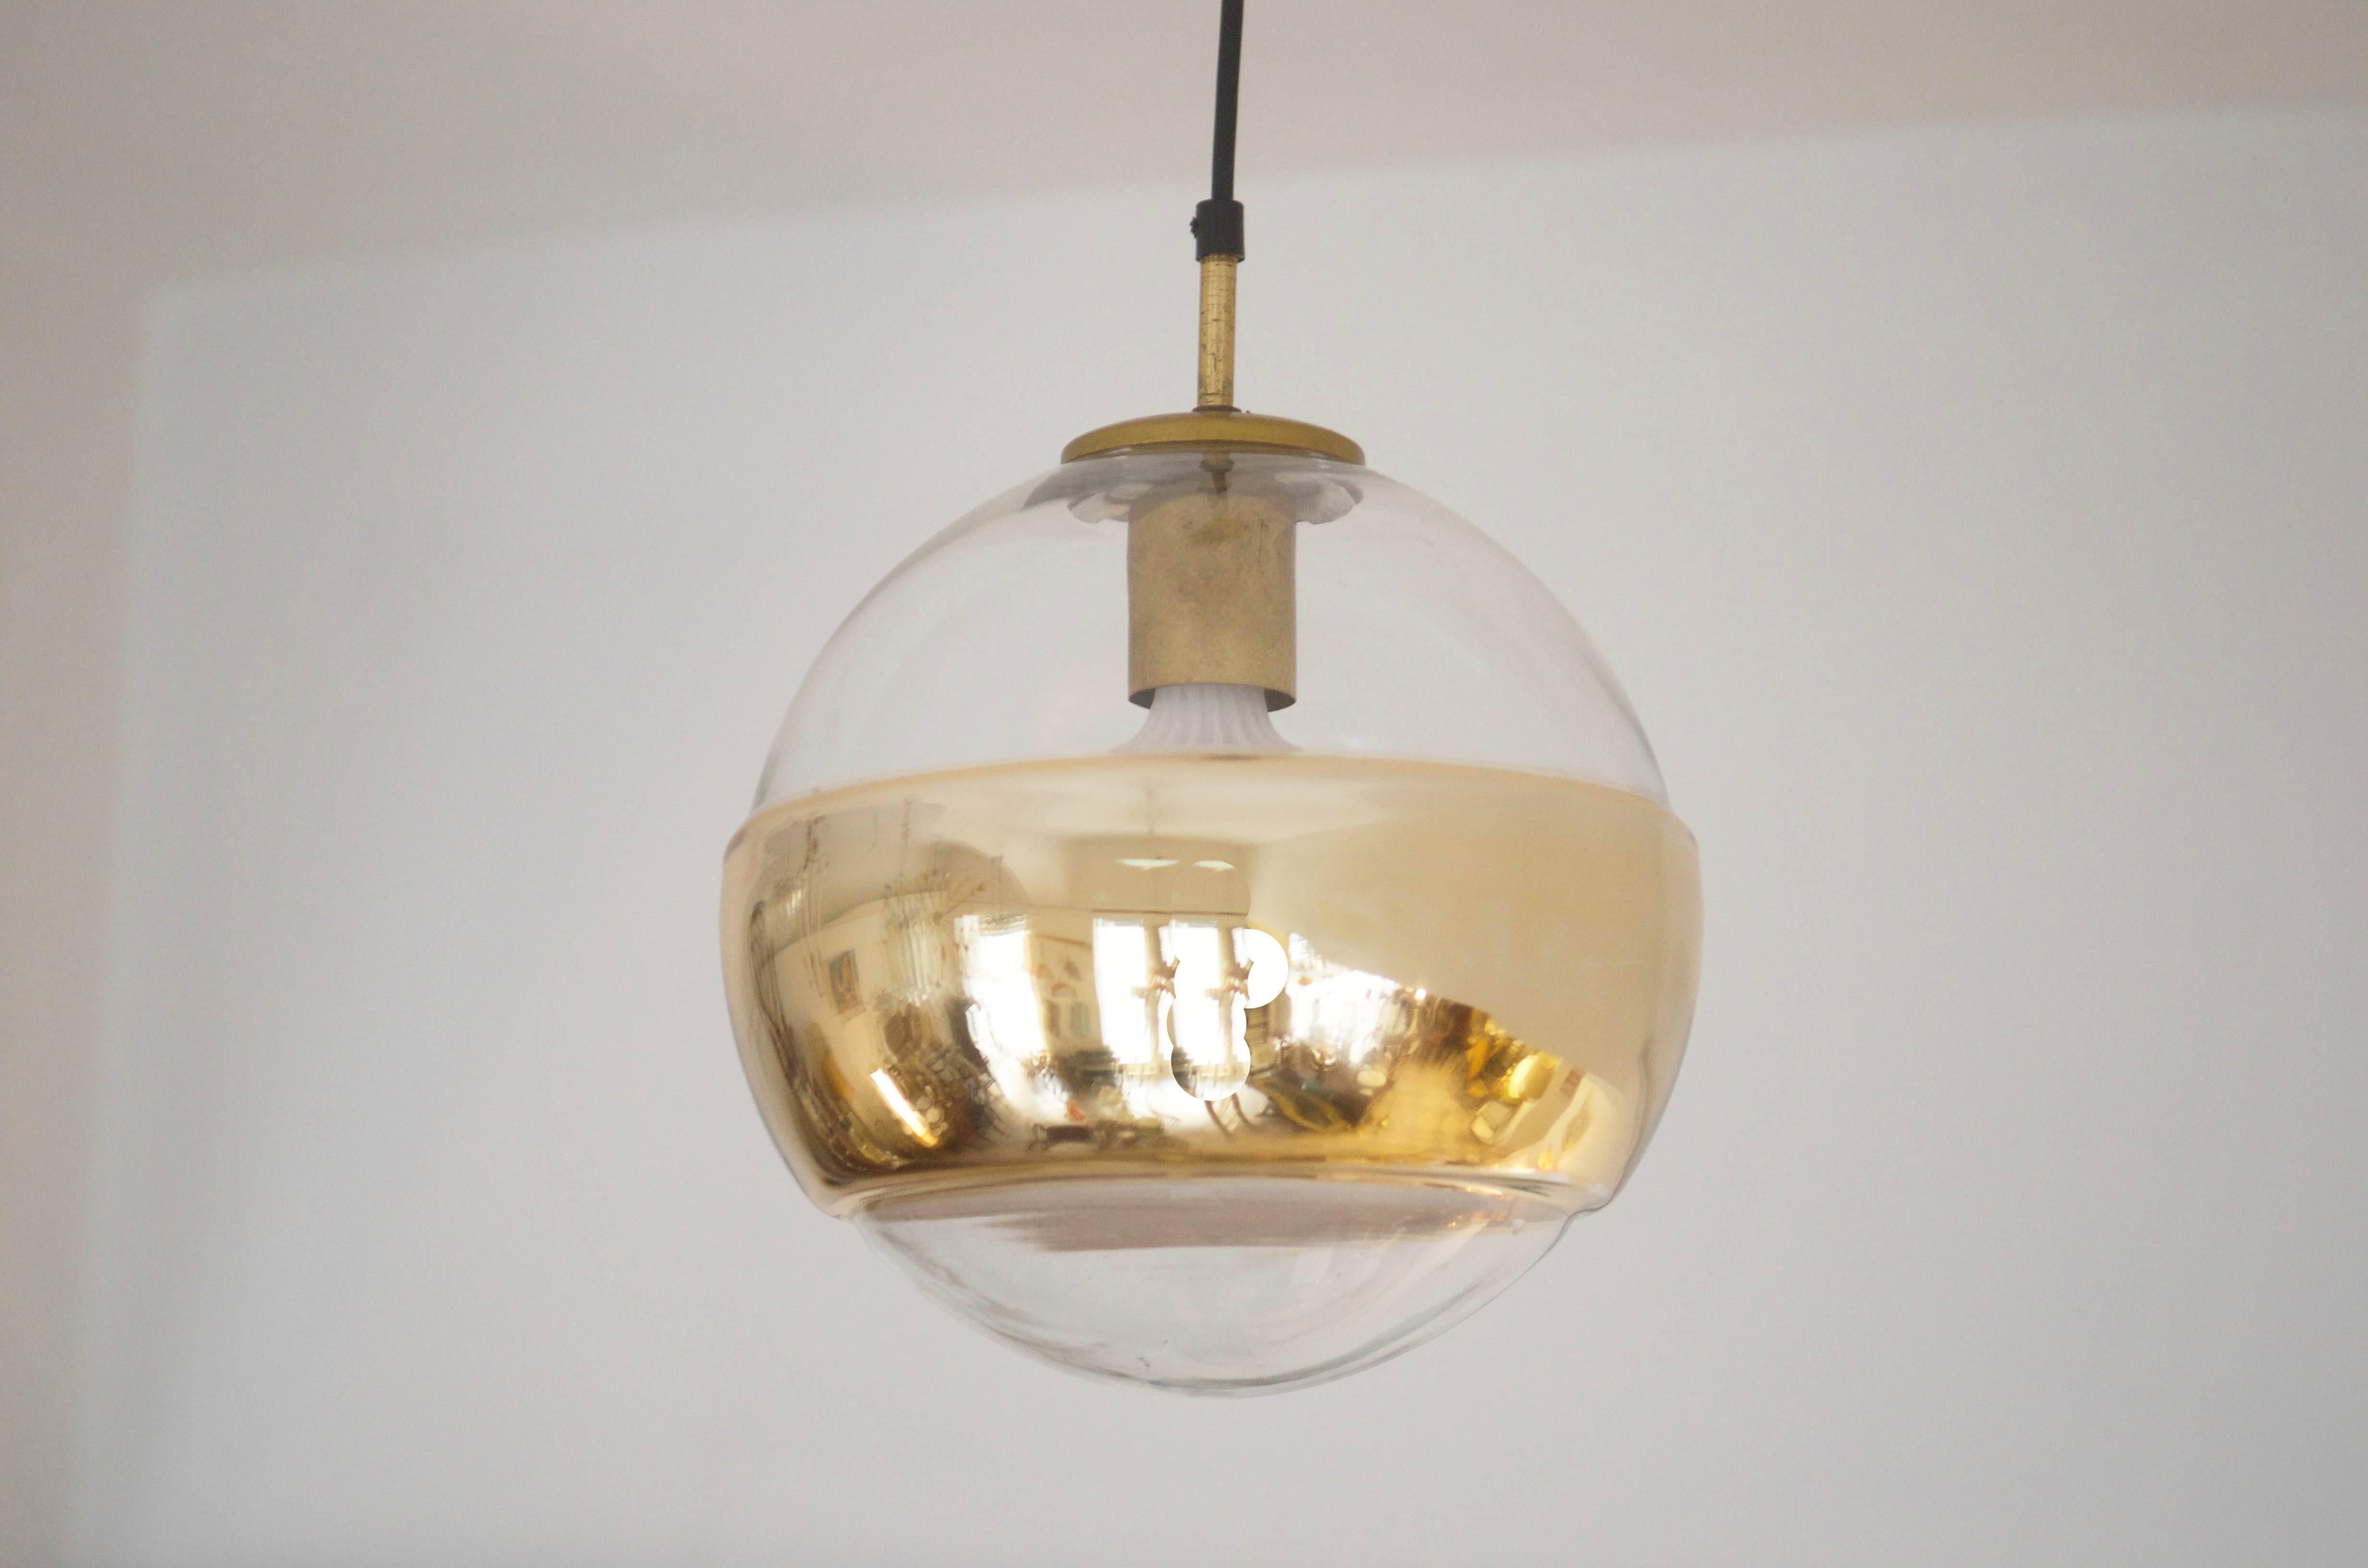 Glass globe with gold strip fitted with one e27 socket.
Made in Germany by Peill & Putzler in the 1960s.